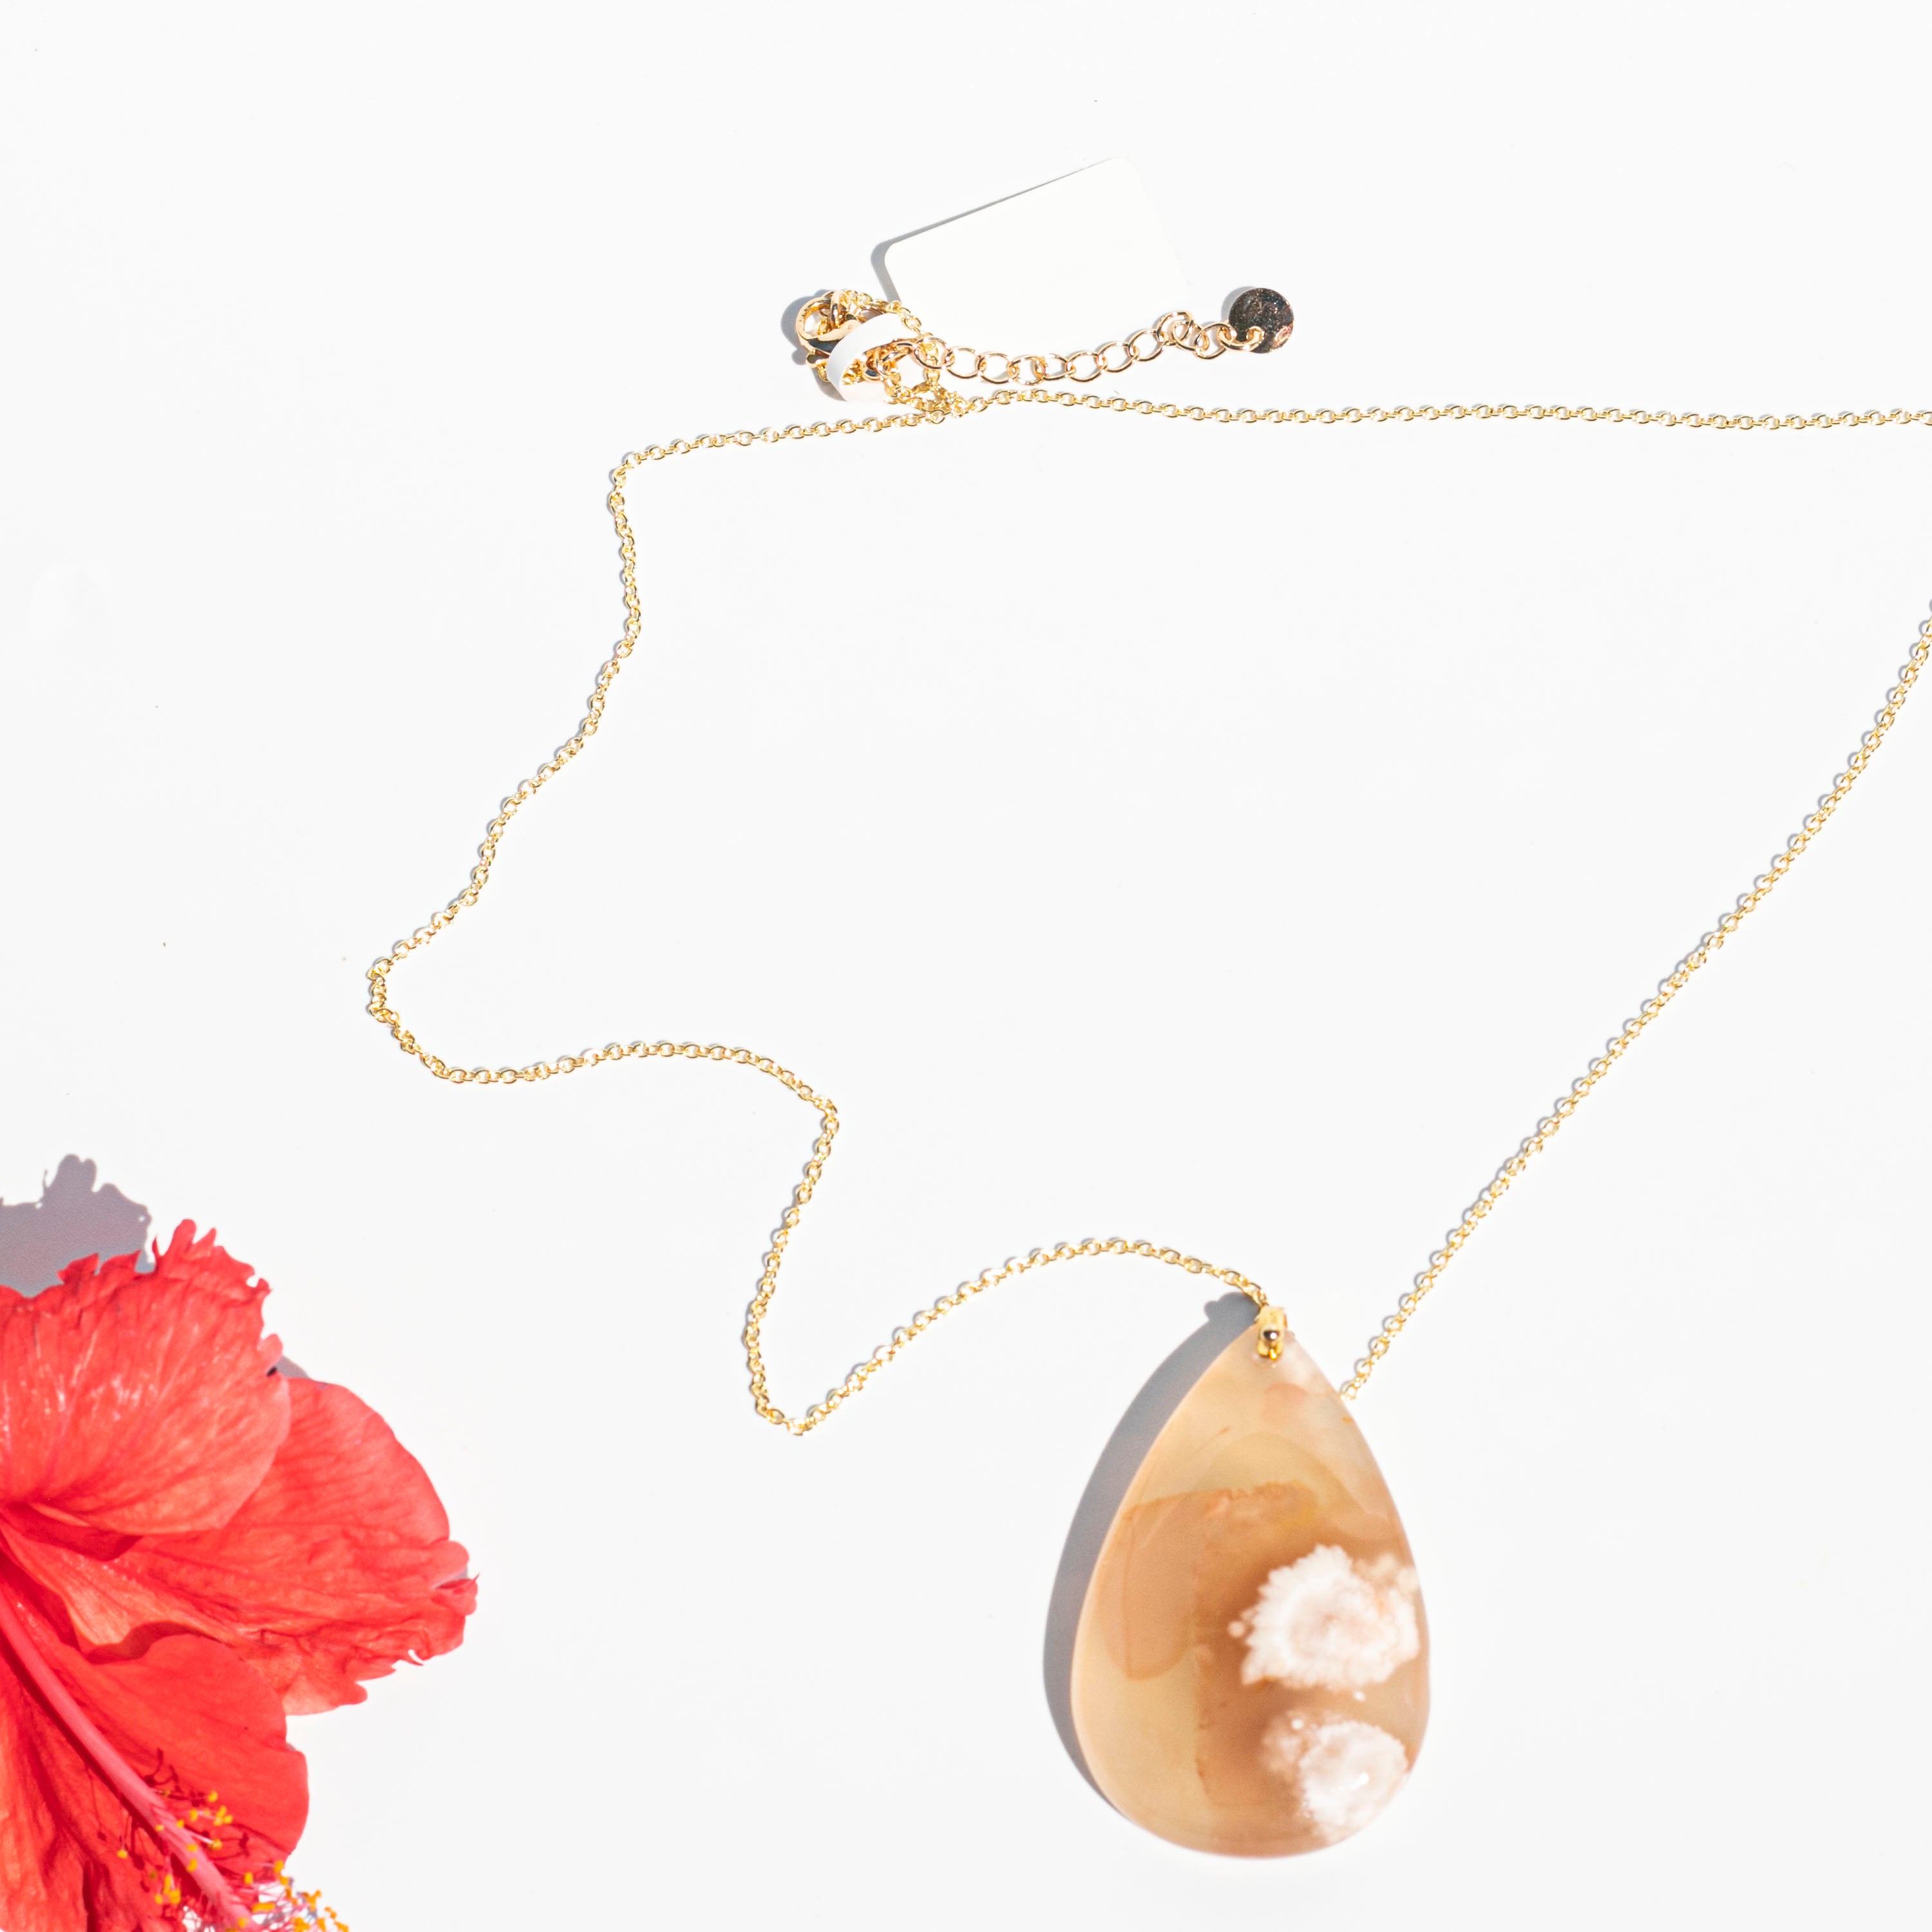 Flower (Cherry Blossom) Agate (櫻花瑪瑙) | Pendant Necklace | The Stone of New Birth